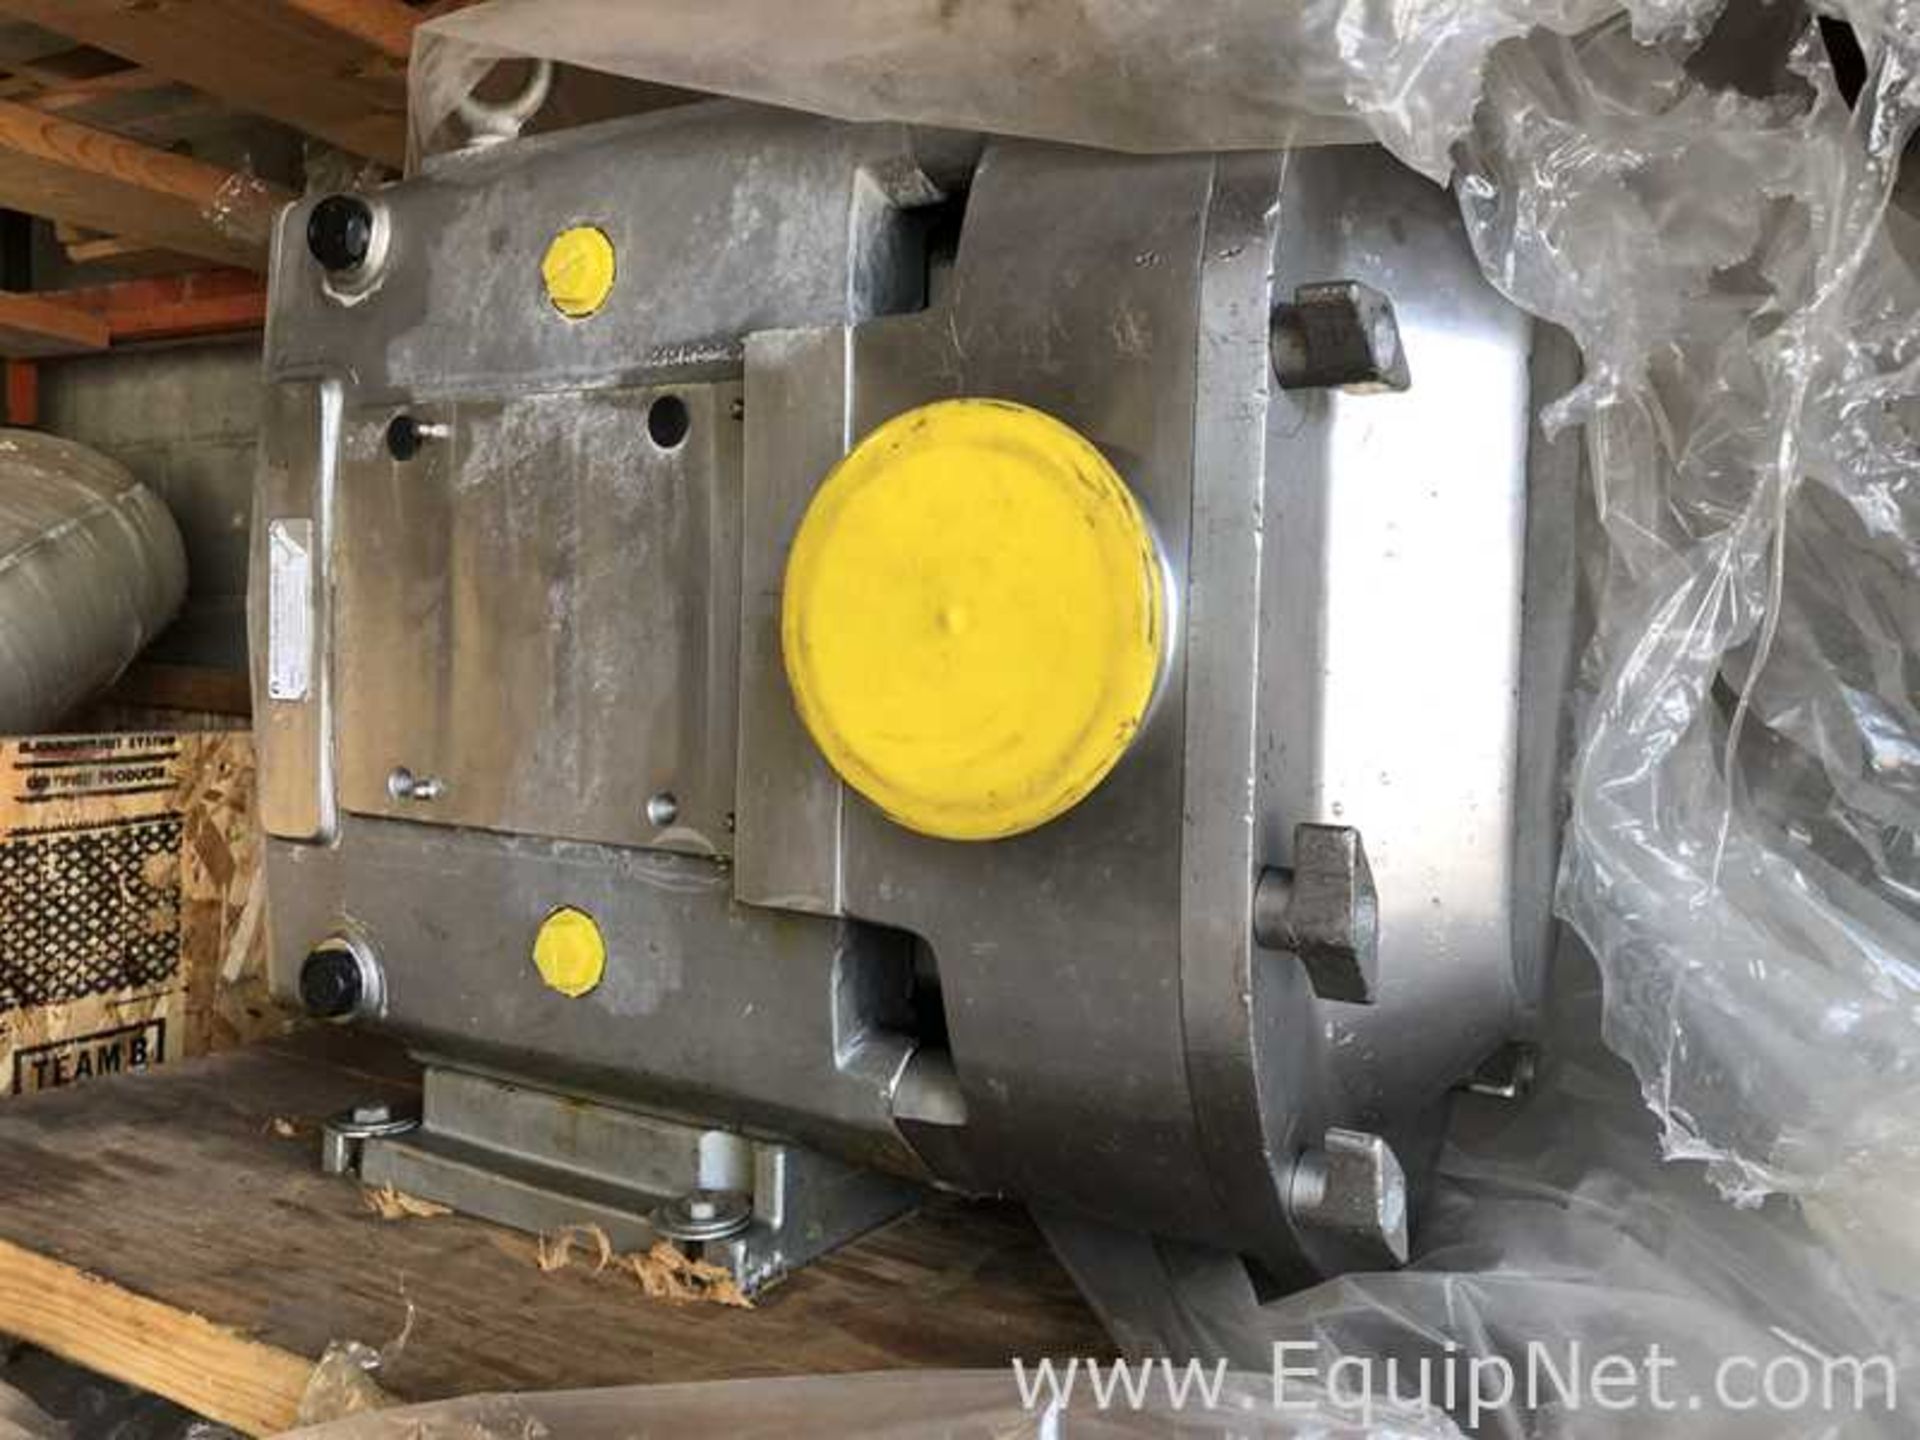 Ampco Pumps RBZP1-130-SO Stainless Steel Positive Displacement Pump - Image 2 of 3